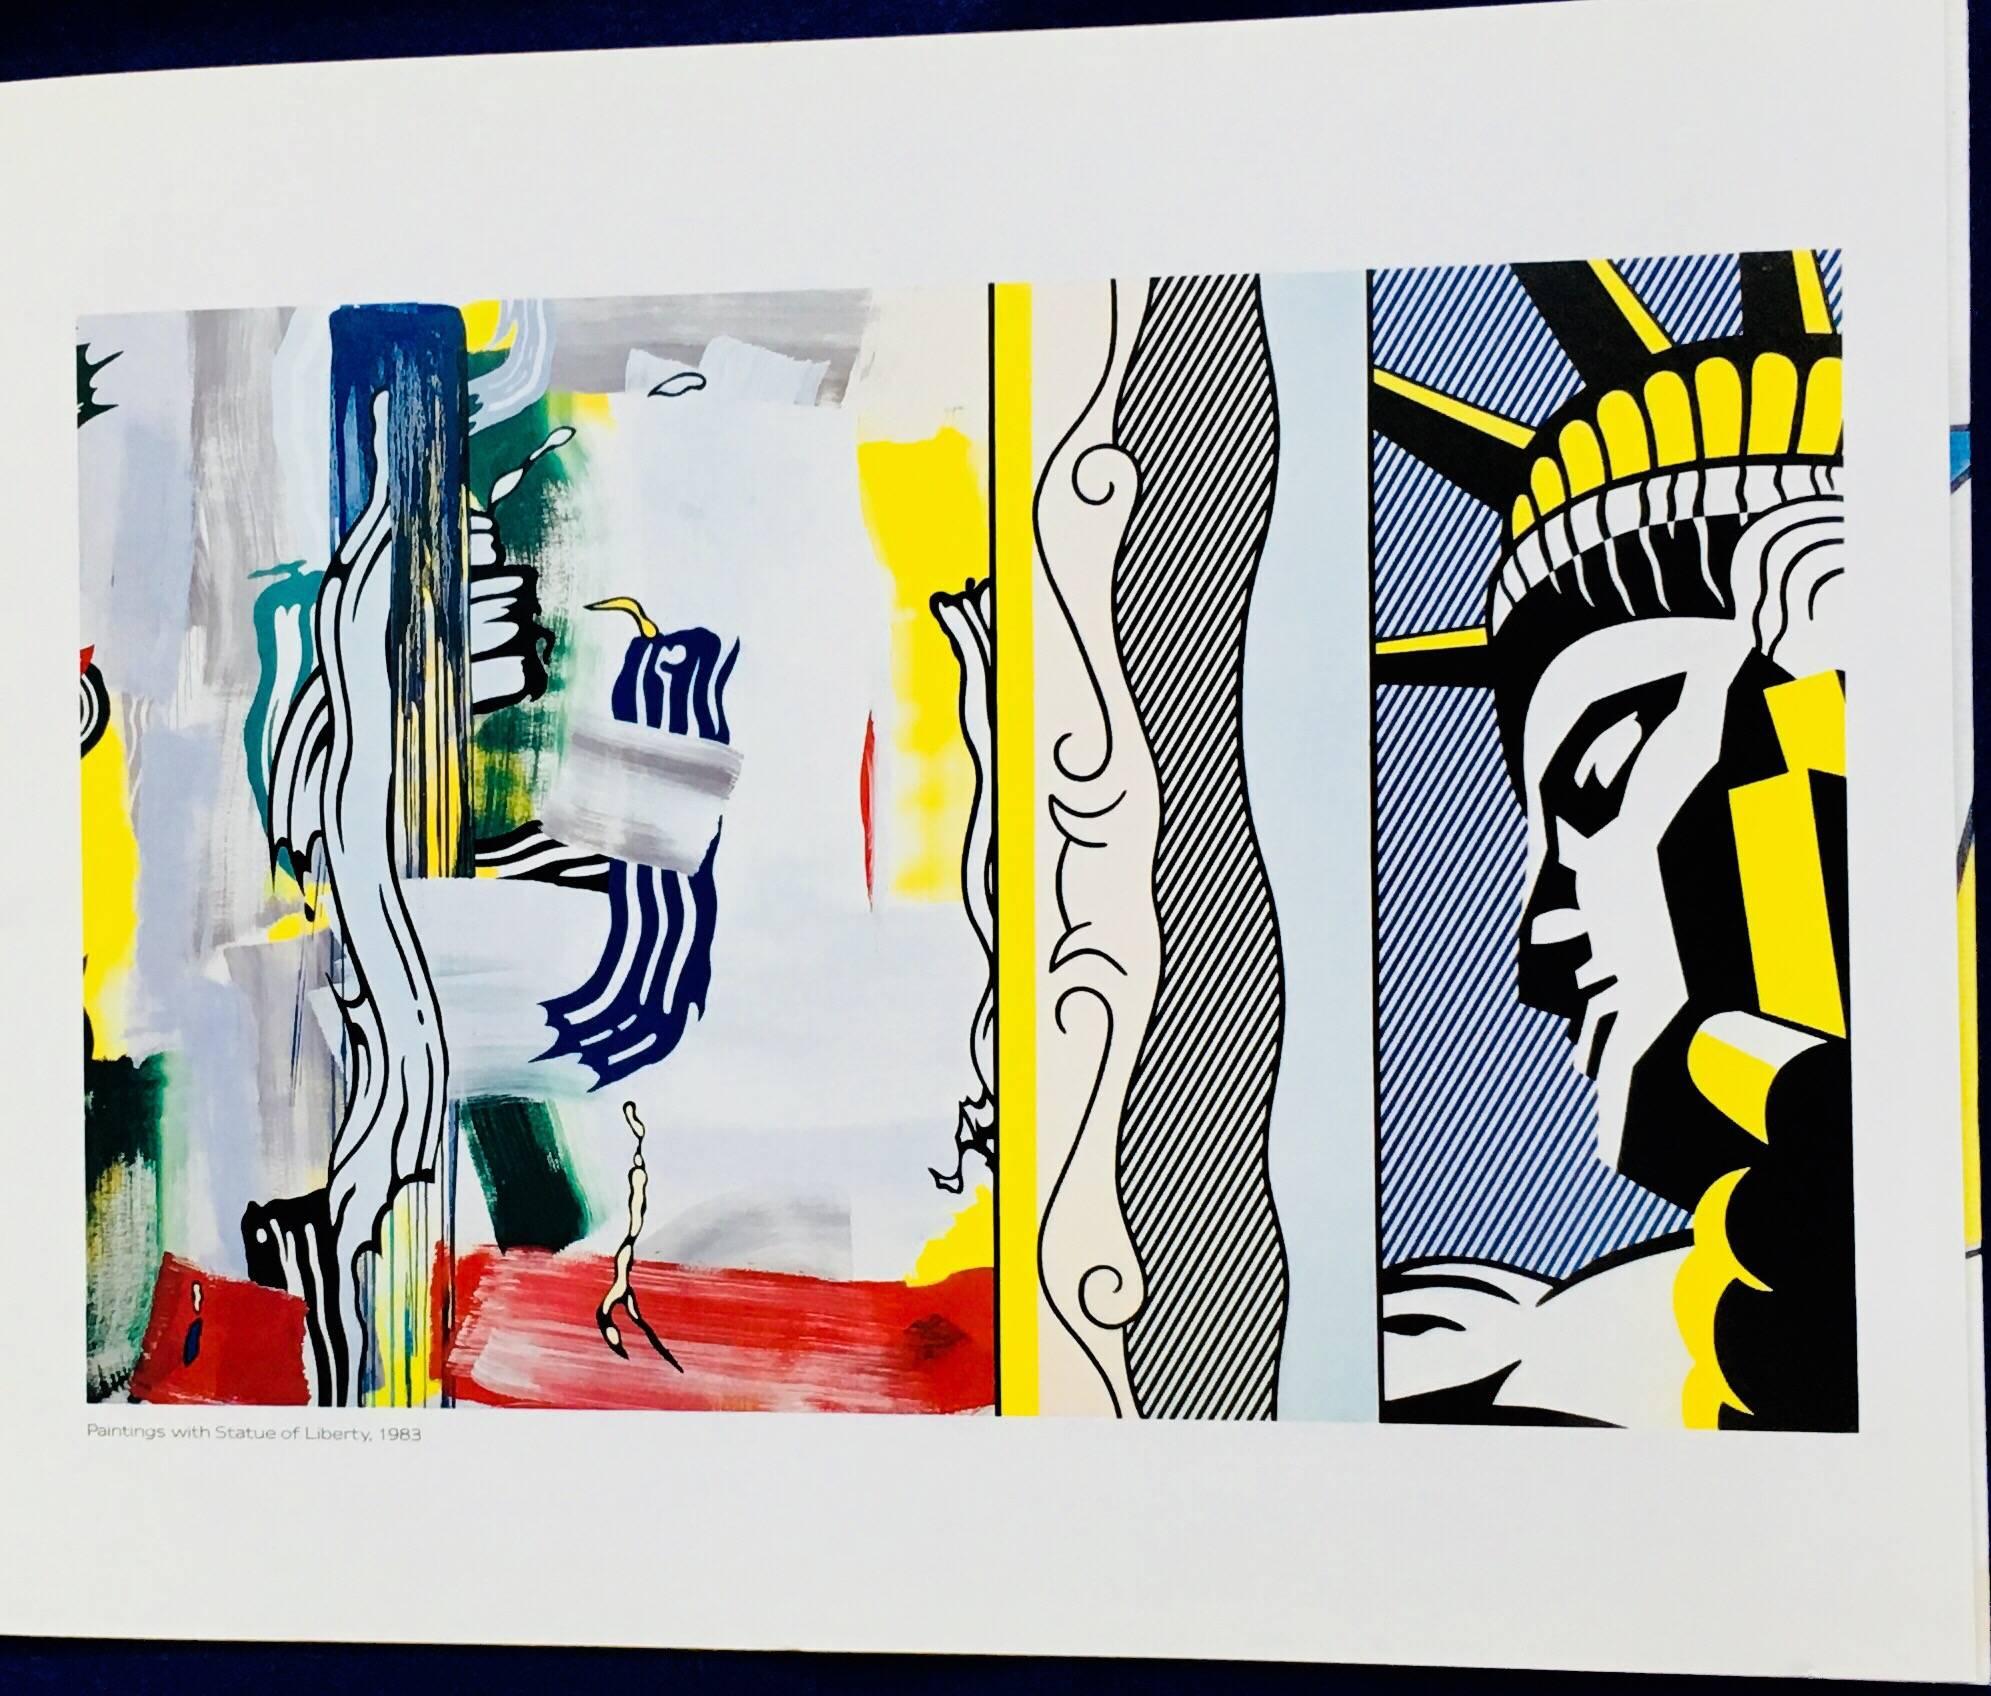 Roy Lichtenstein at Leo Castelli Gallery, New York
December 3, 1983-January 14, 1984
Vintage original exhibition catalog 

Good to very good condition
Measure: 11 W x 9 H inches
Softcover with color illustrations

Related categories
Pop